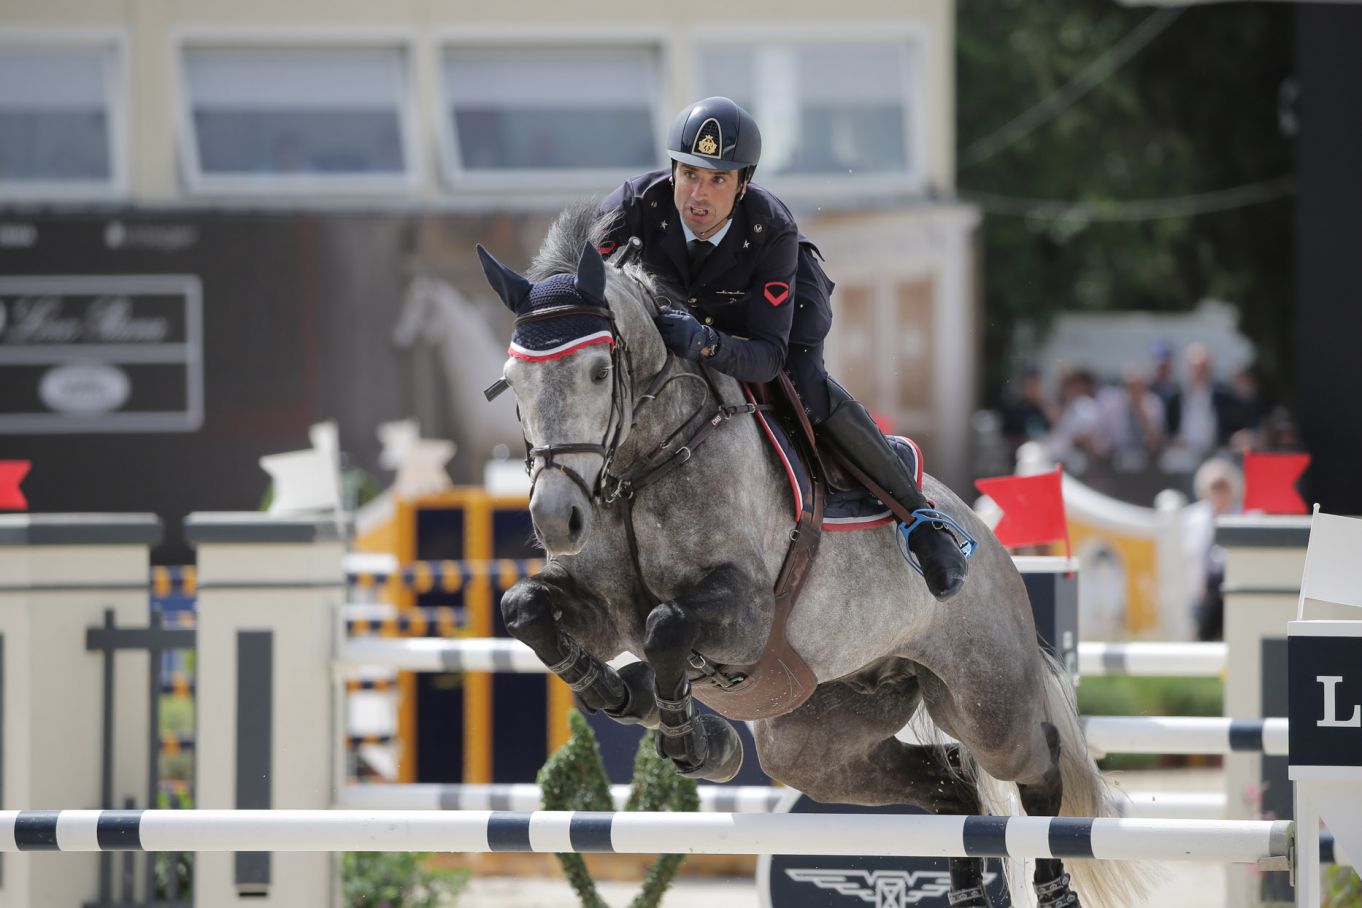 Rome’s Piazza di Siena horse show Wanted in Rome